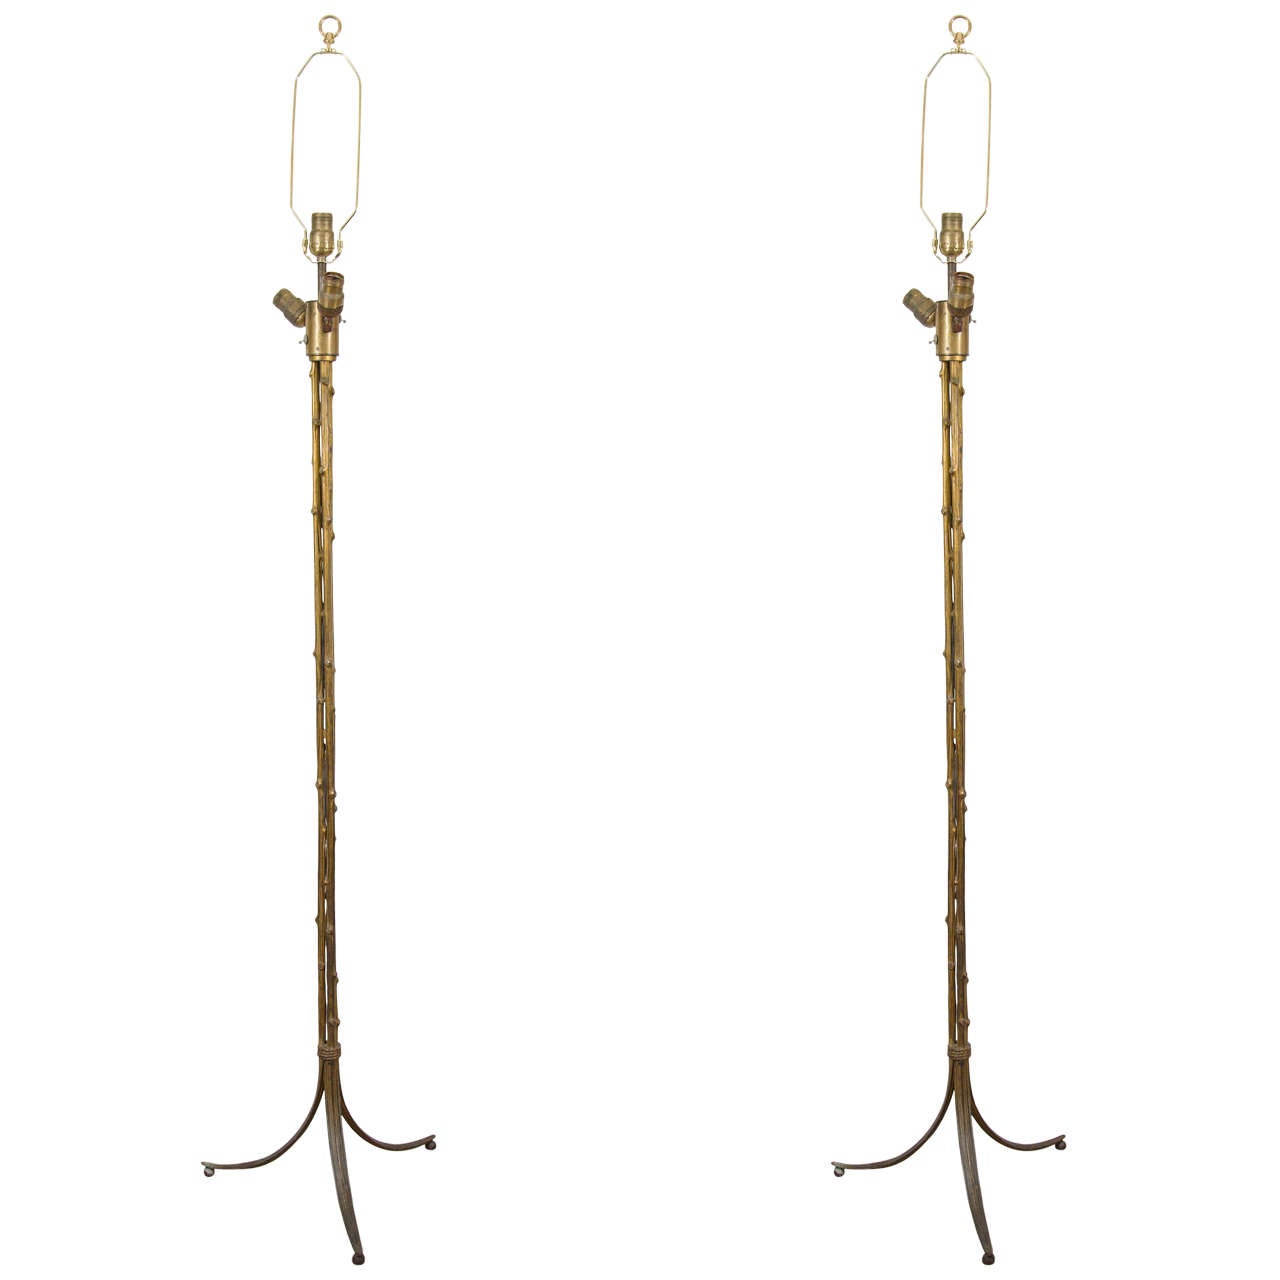 Midcentury Pair of Gilt Bamboo Bronze Floor Lamps by Maison Baguès For Sale